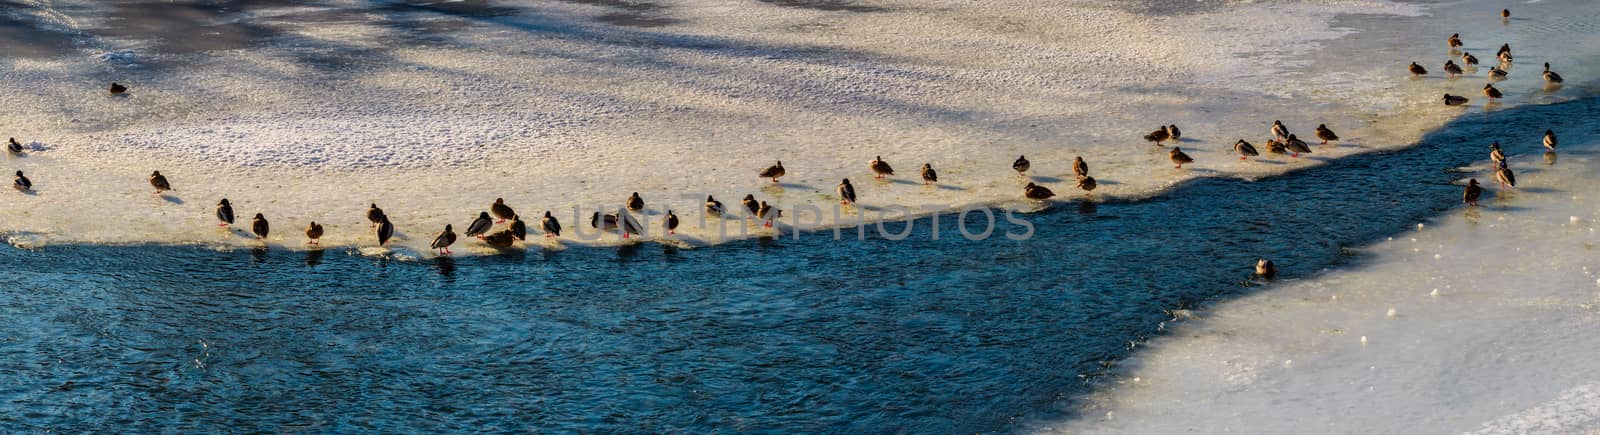 flock of ducks on the ice of frozen river by Pellinni